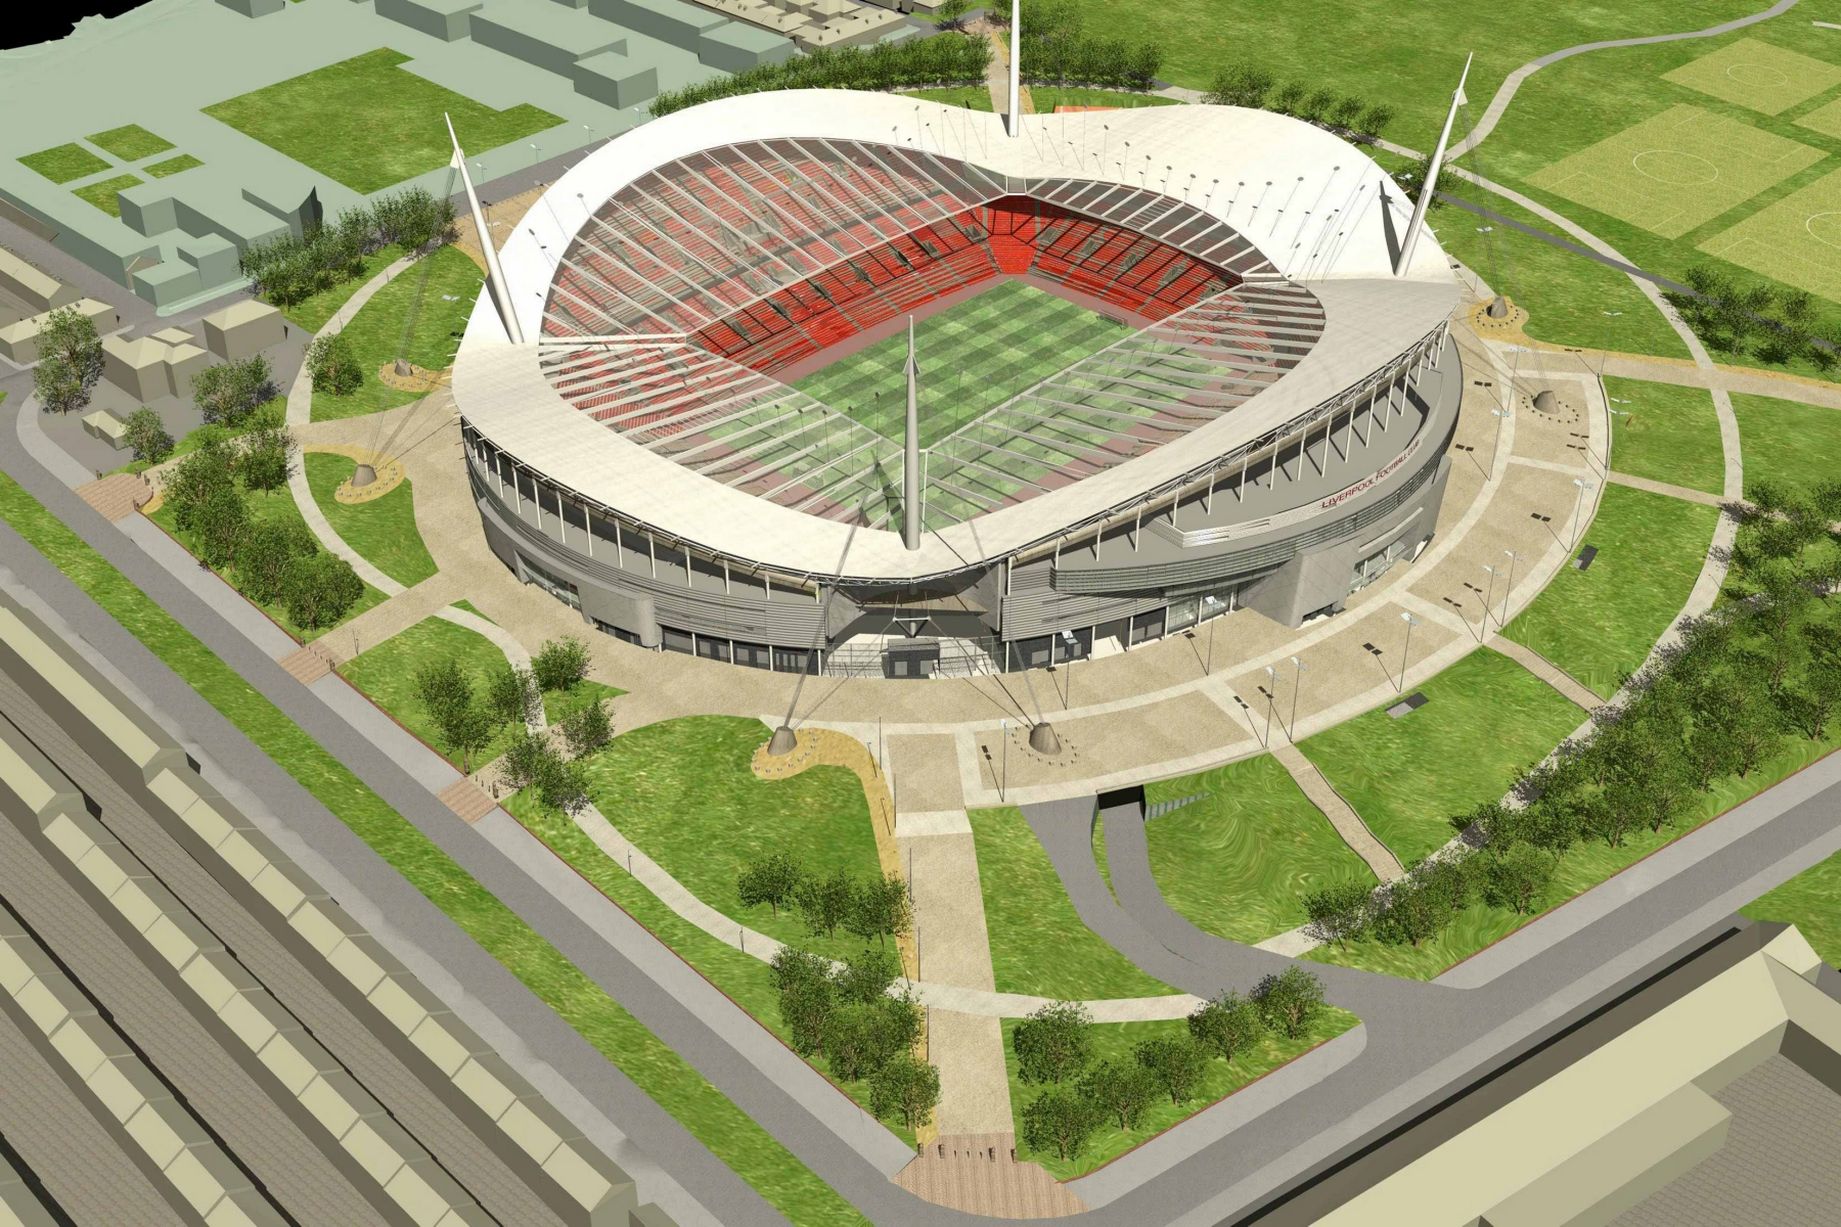 Another concept for the Stanley Park Stadium